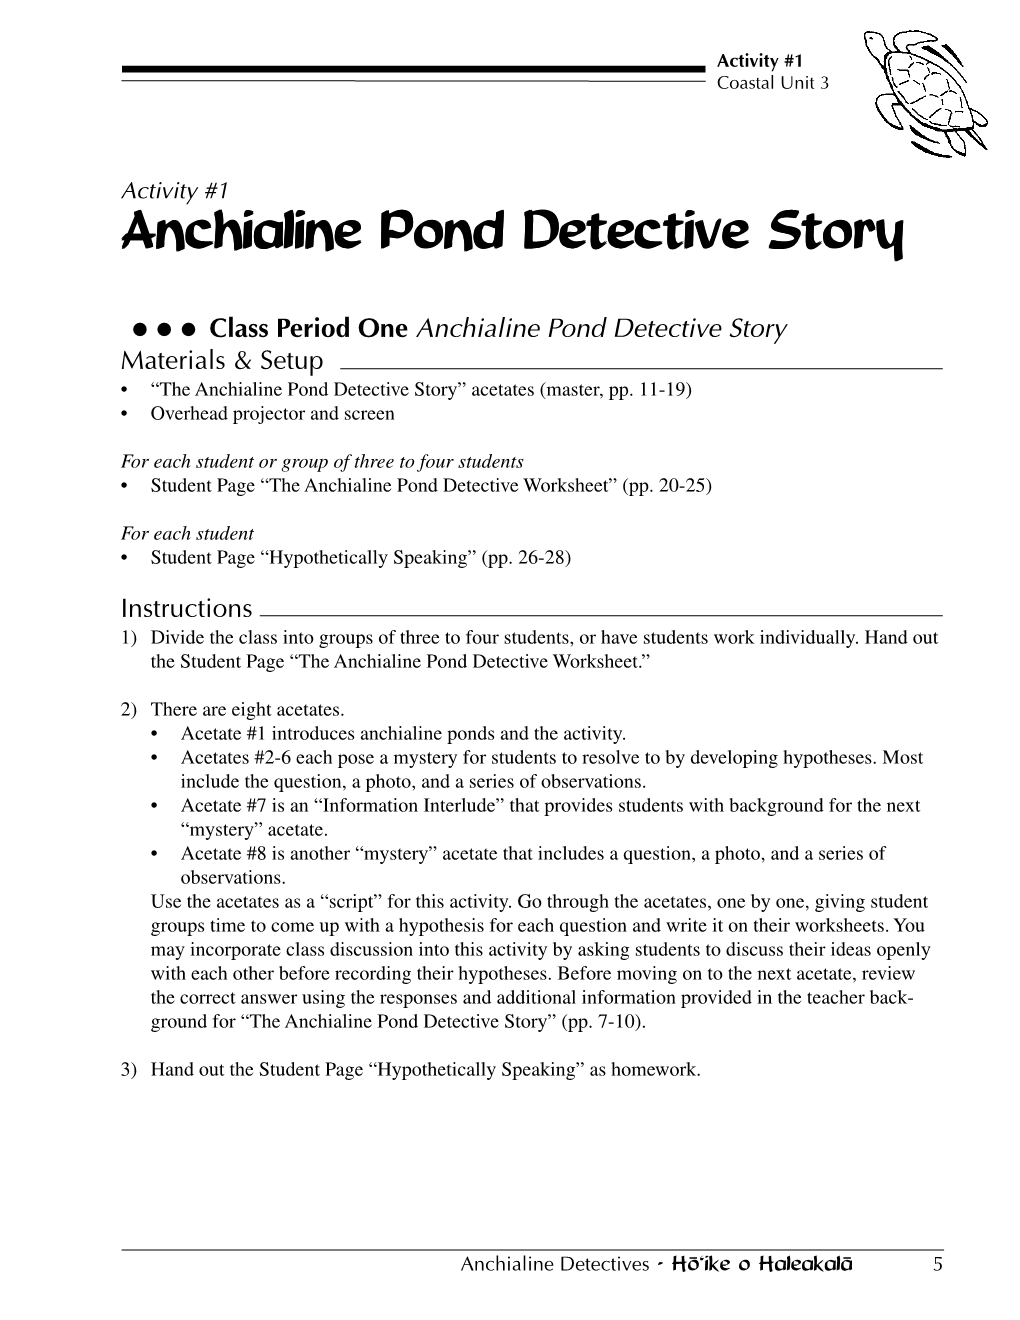 Anchialine Pond Detective Story